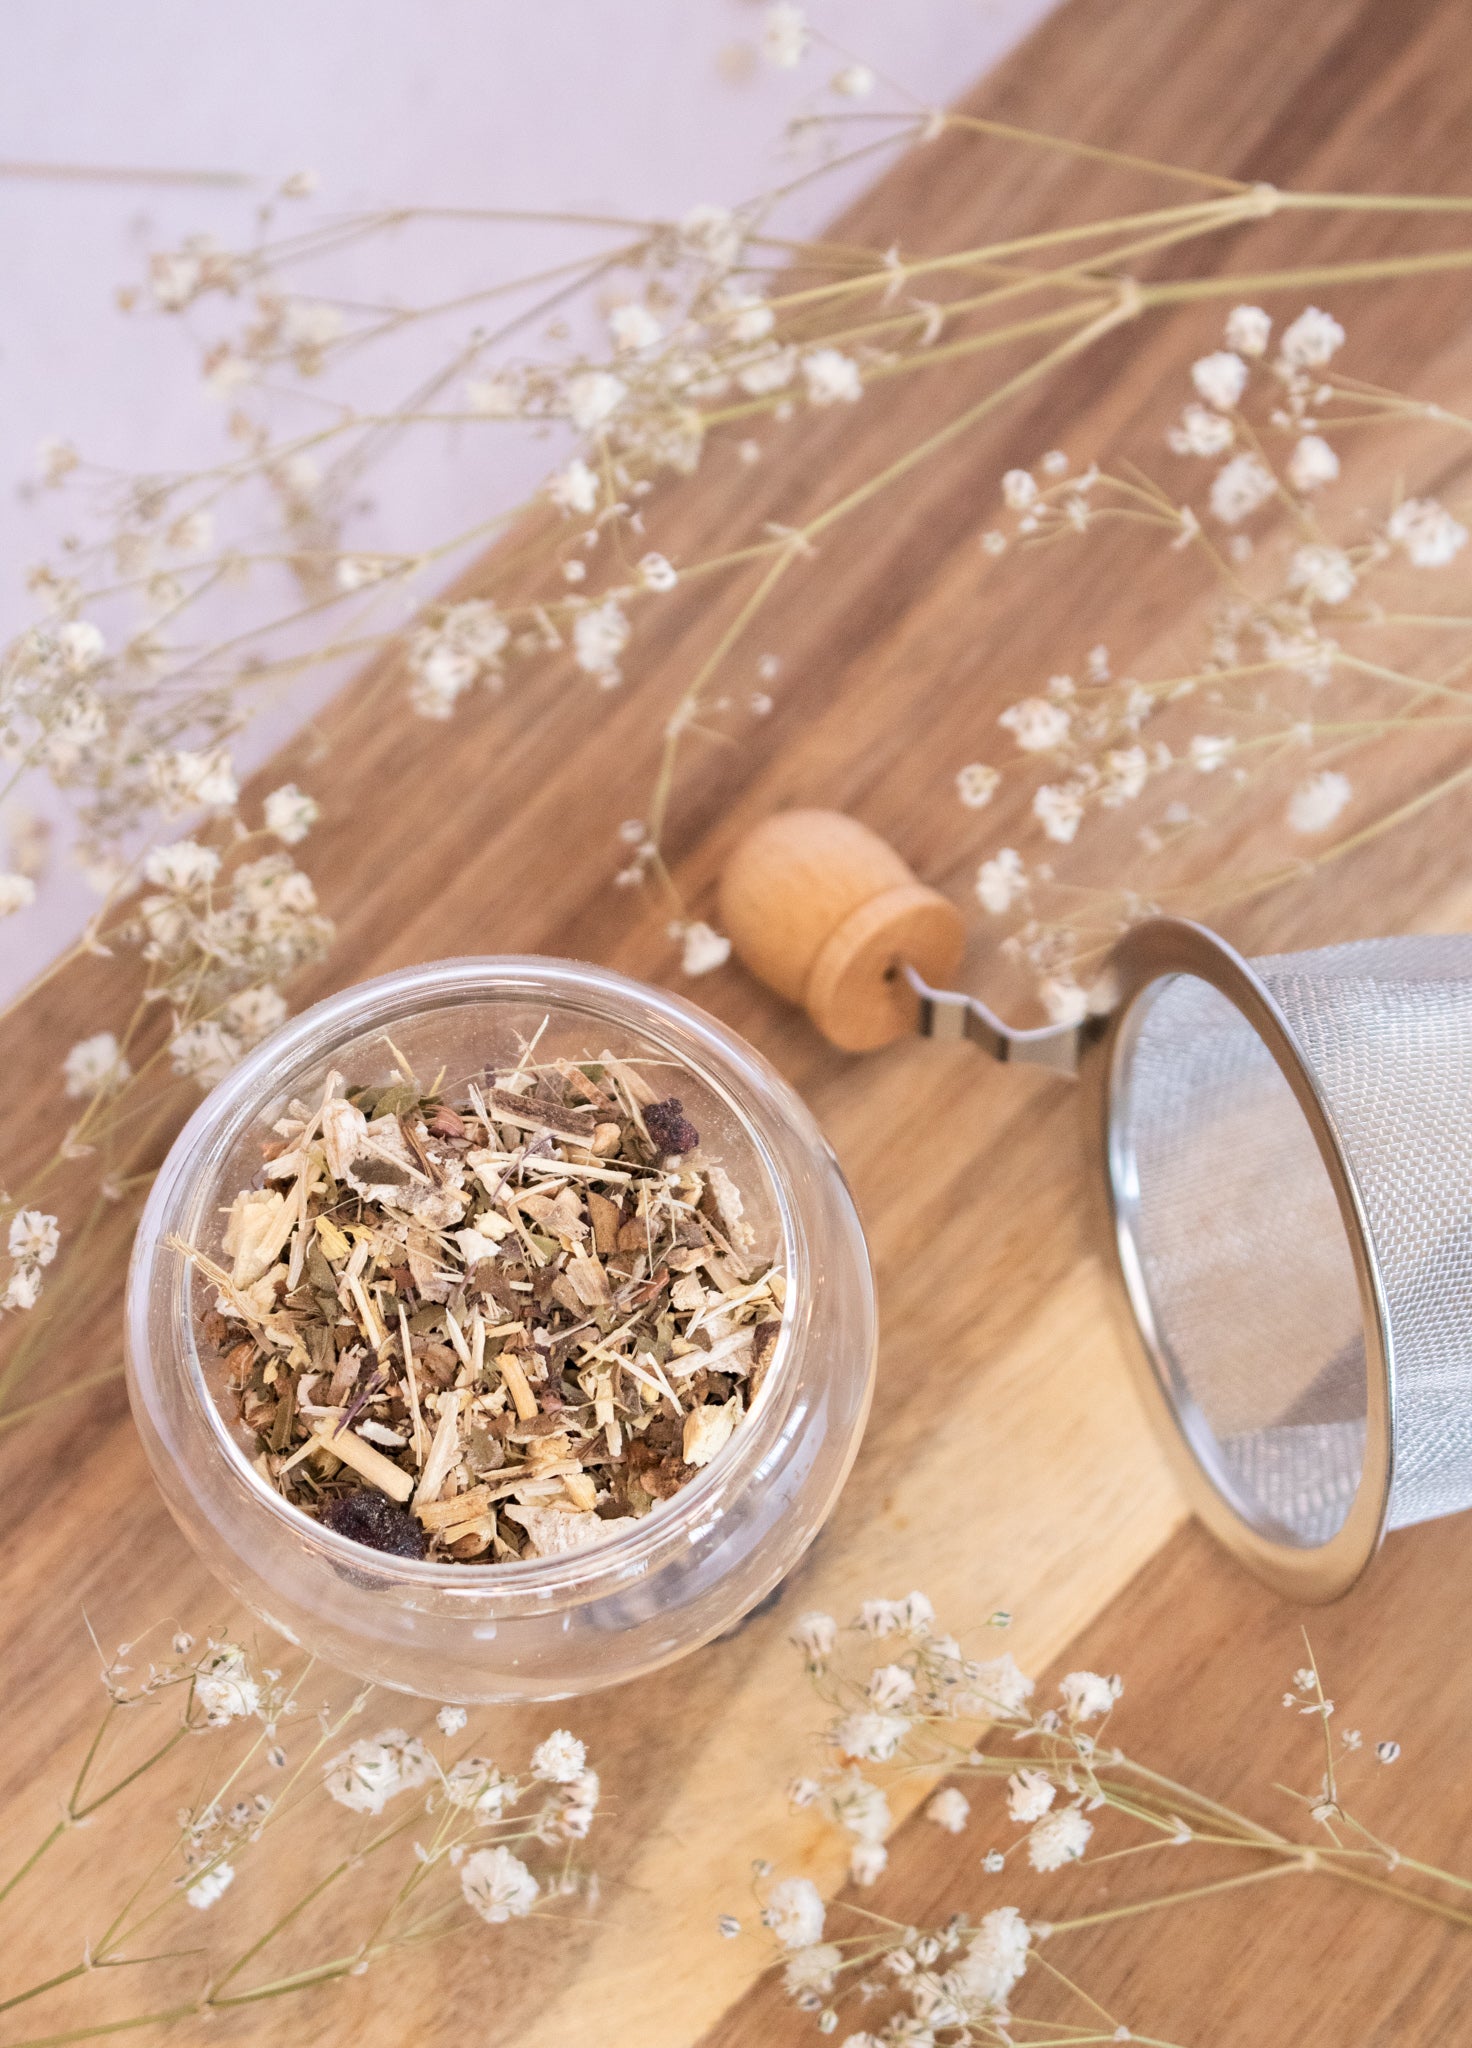 Our organic adaptogenic herbal tea blend is made from a variety of powerful adaptogenic herbs such as Ginseng Root and Ashwagandha for adrenal support and a healthy stress res